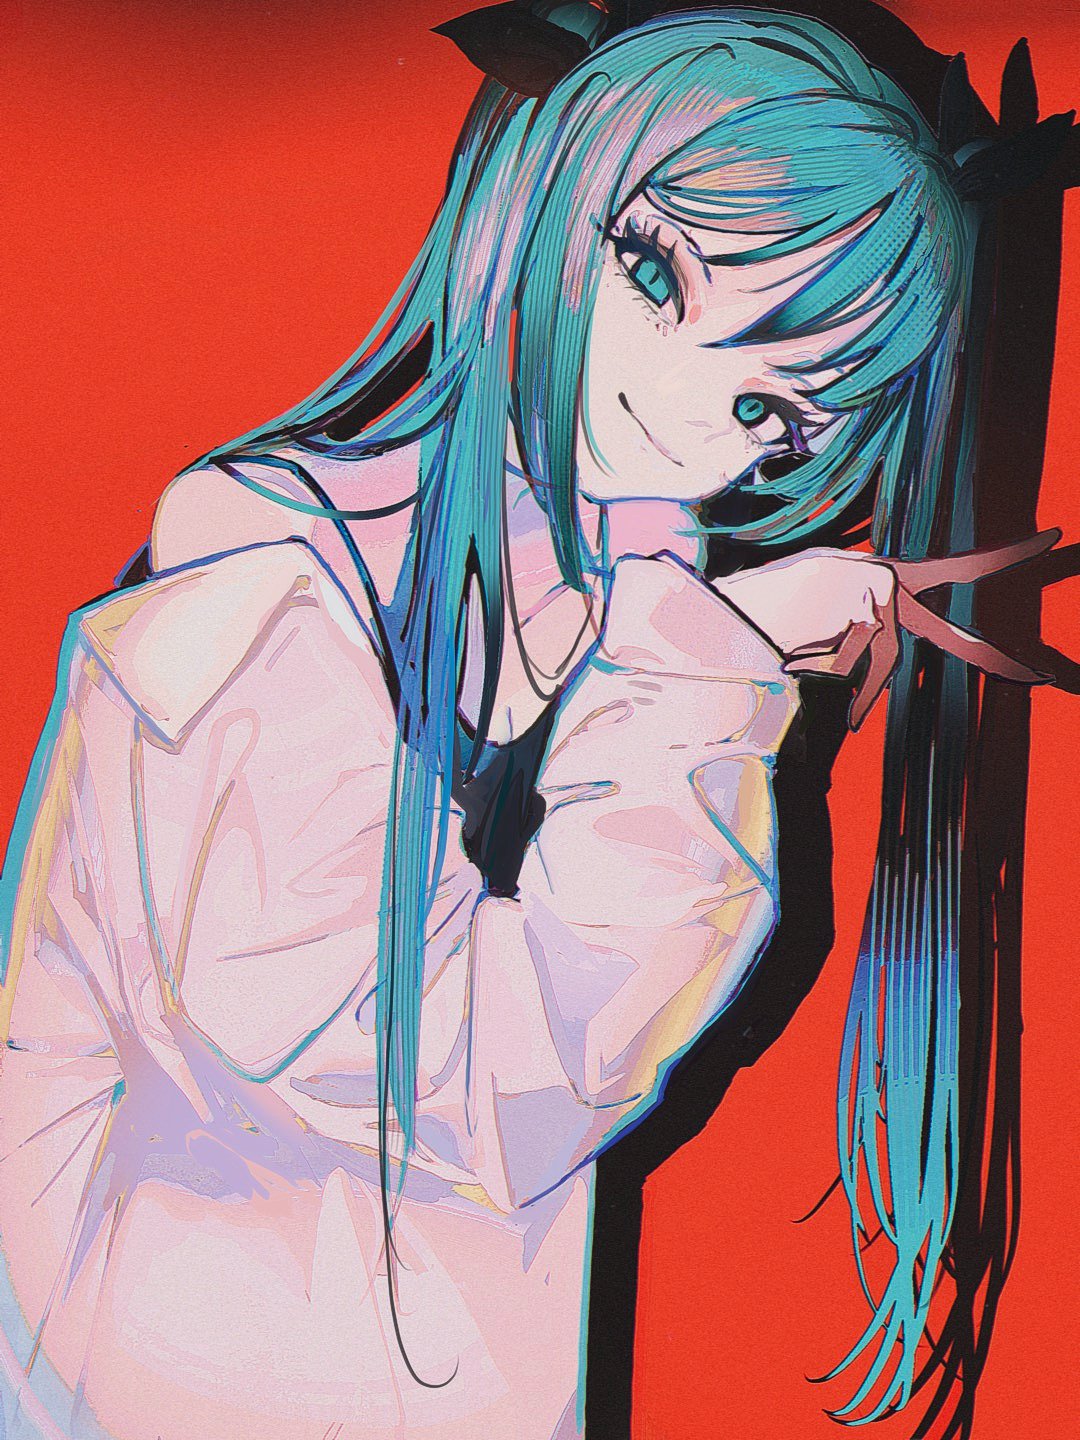 Anime 1080x1440 John Kafka anime anime girls Hatsune Miku looking at viewer Vocaloid closed mouth long hair hair hanging down smiling blue hair blue eyes simple background shadow portrait display peace sign long sleeves red background